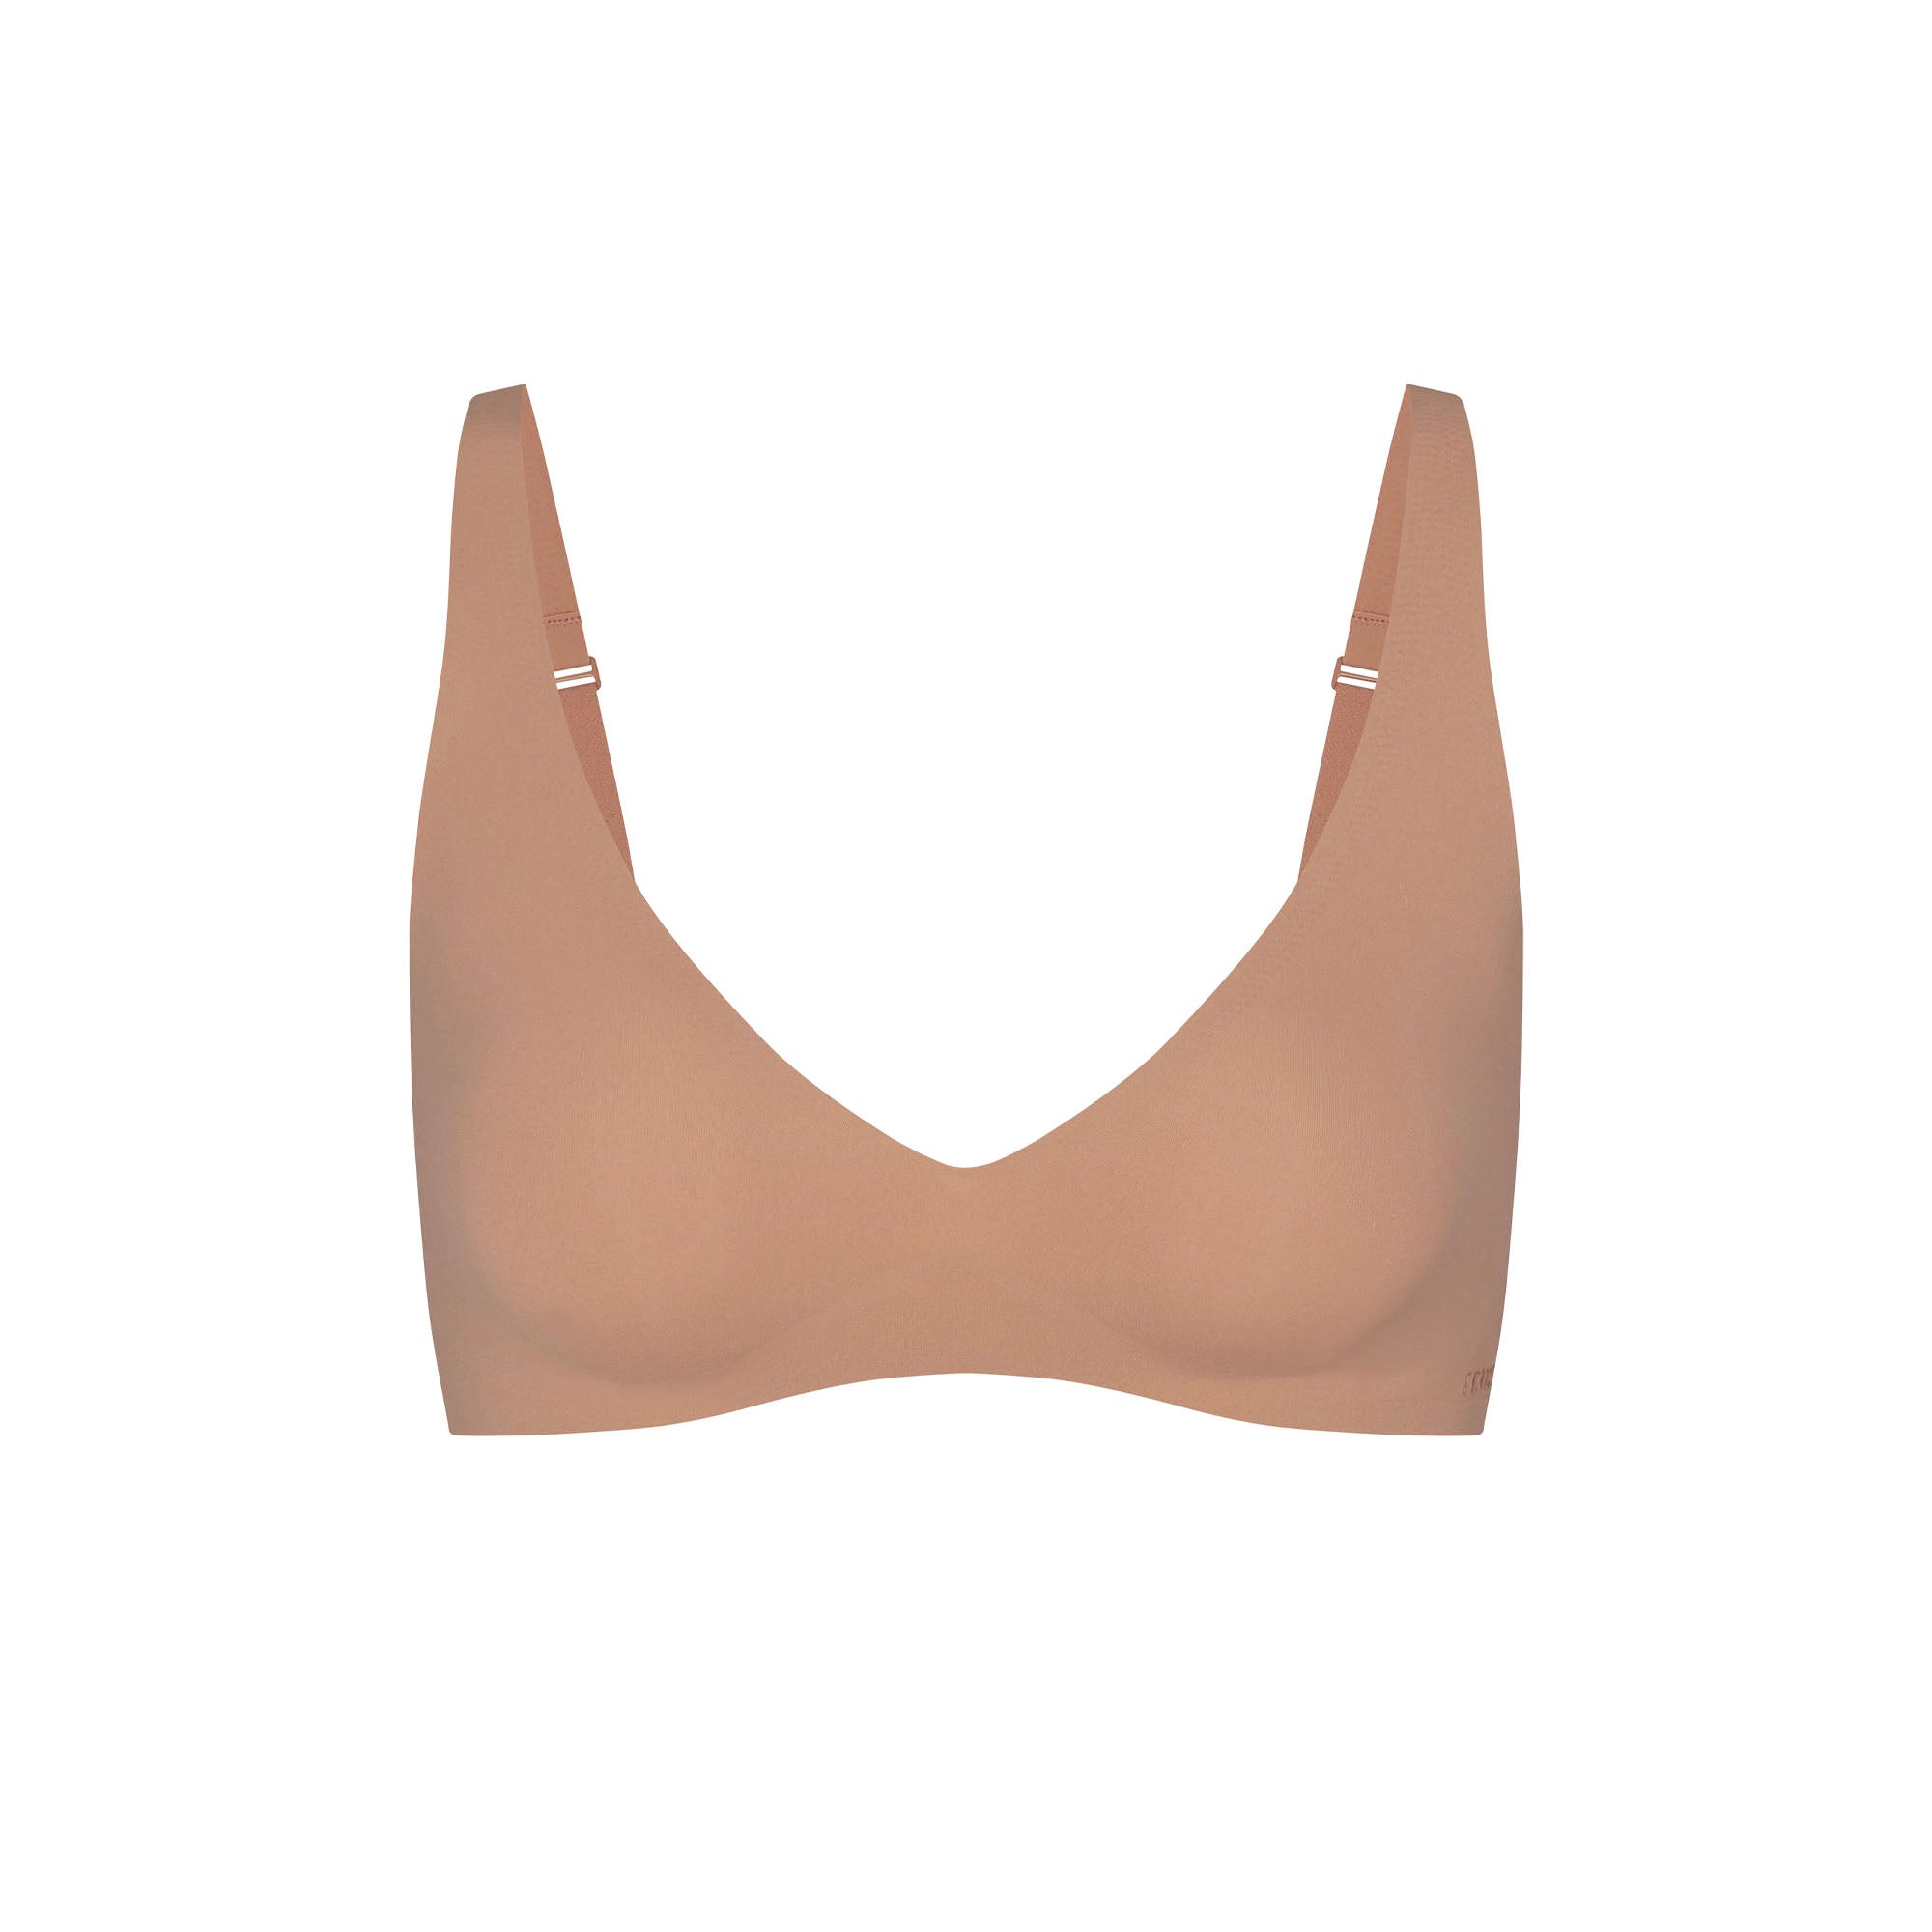 Charnos Sienna Full Cup Bra In Brulee Nude 129501